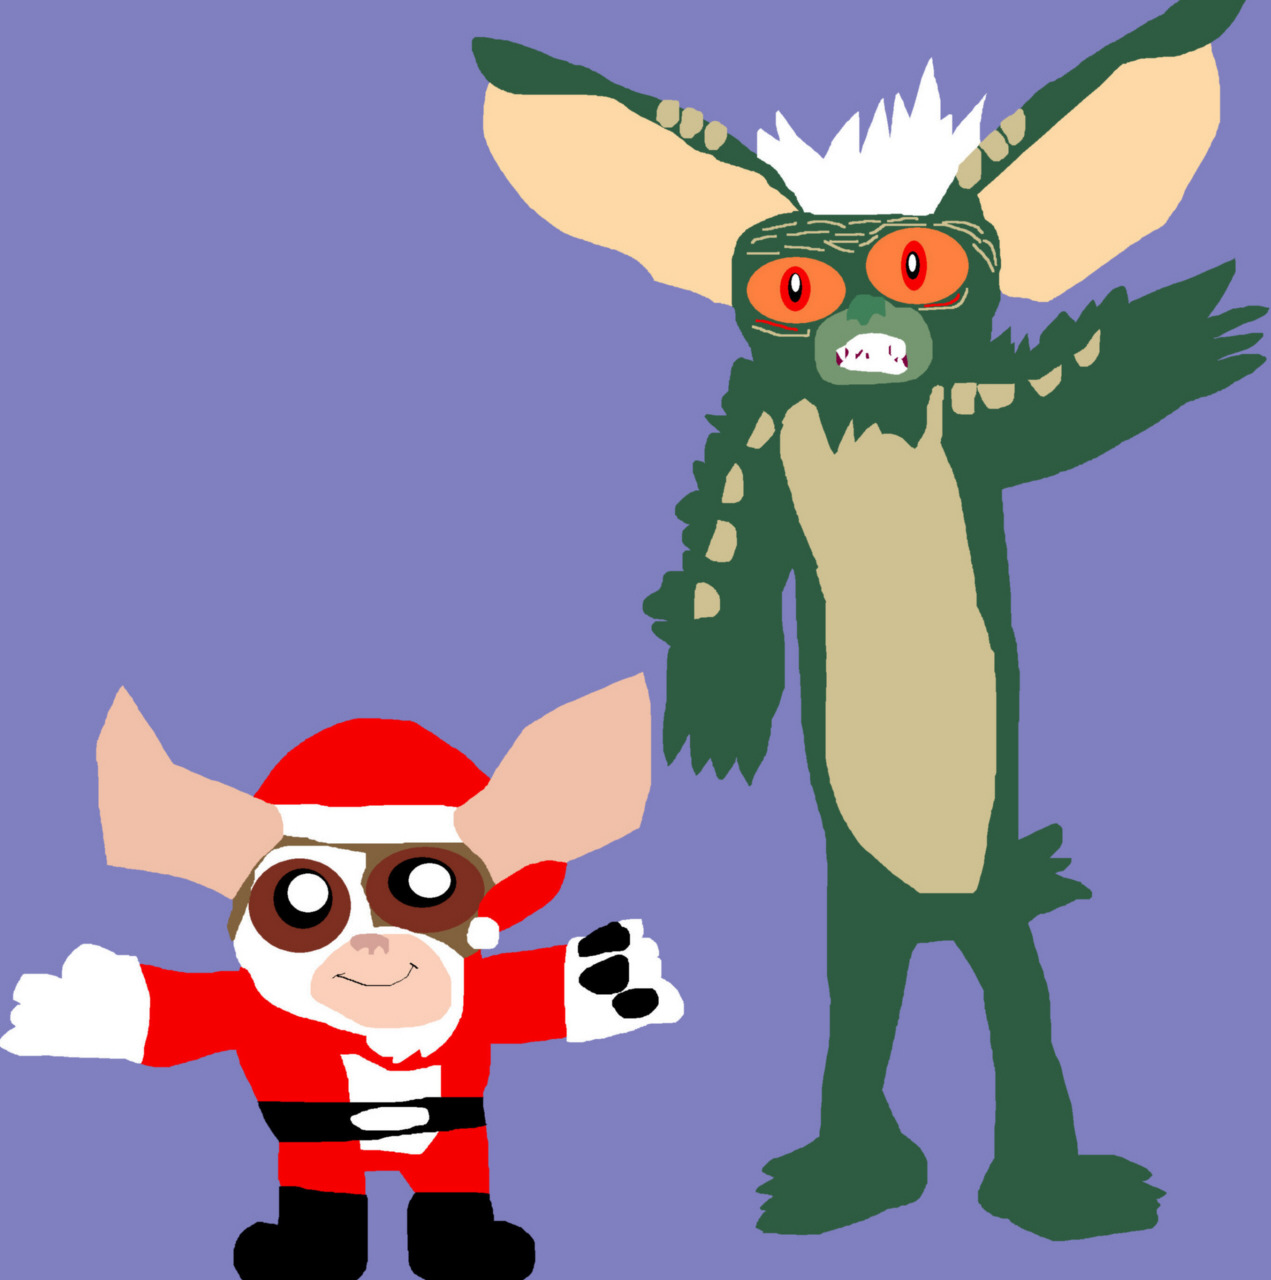 A Very Gremlins Christmas Scene MS Paint^0^ by Falconlobo